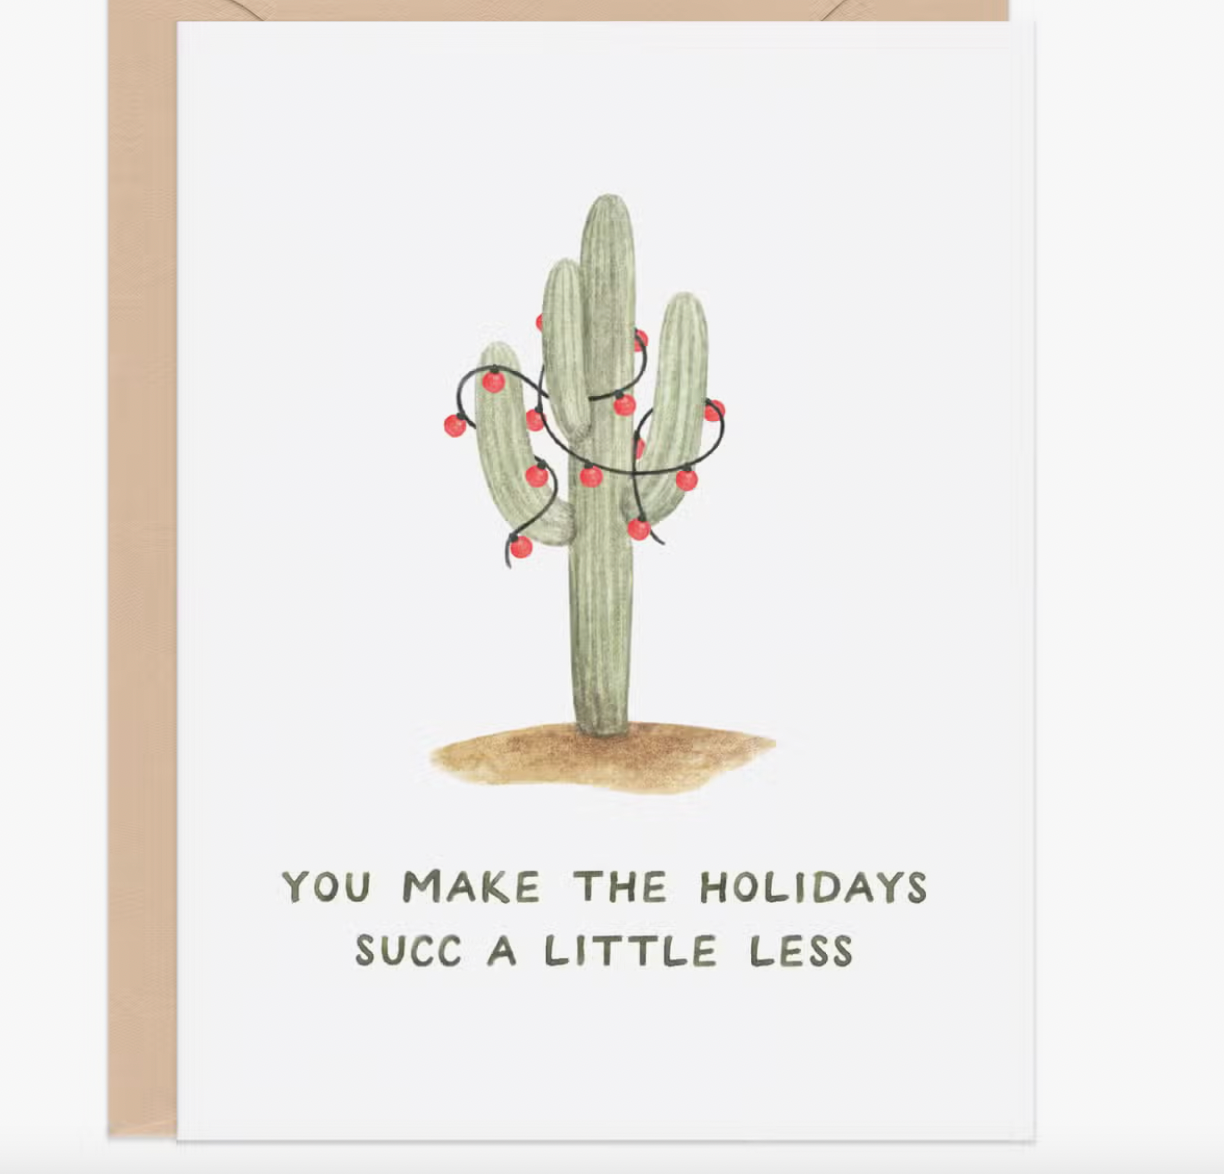 Greeting Cards by Amy Zhang